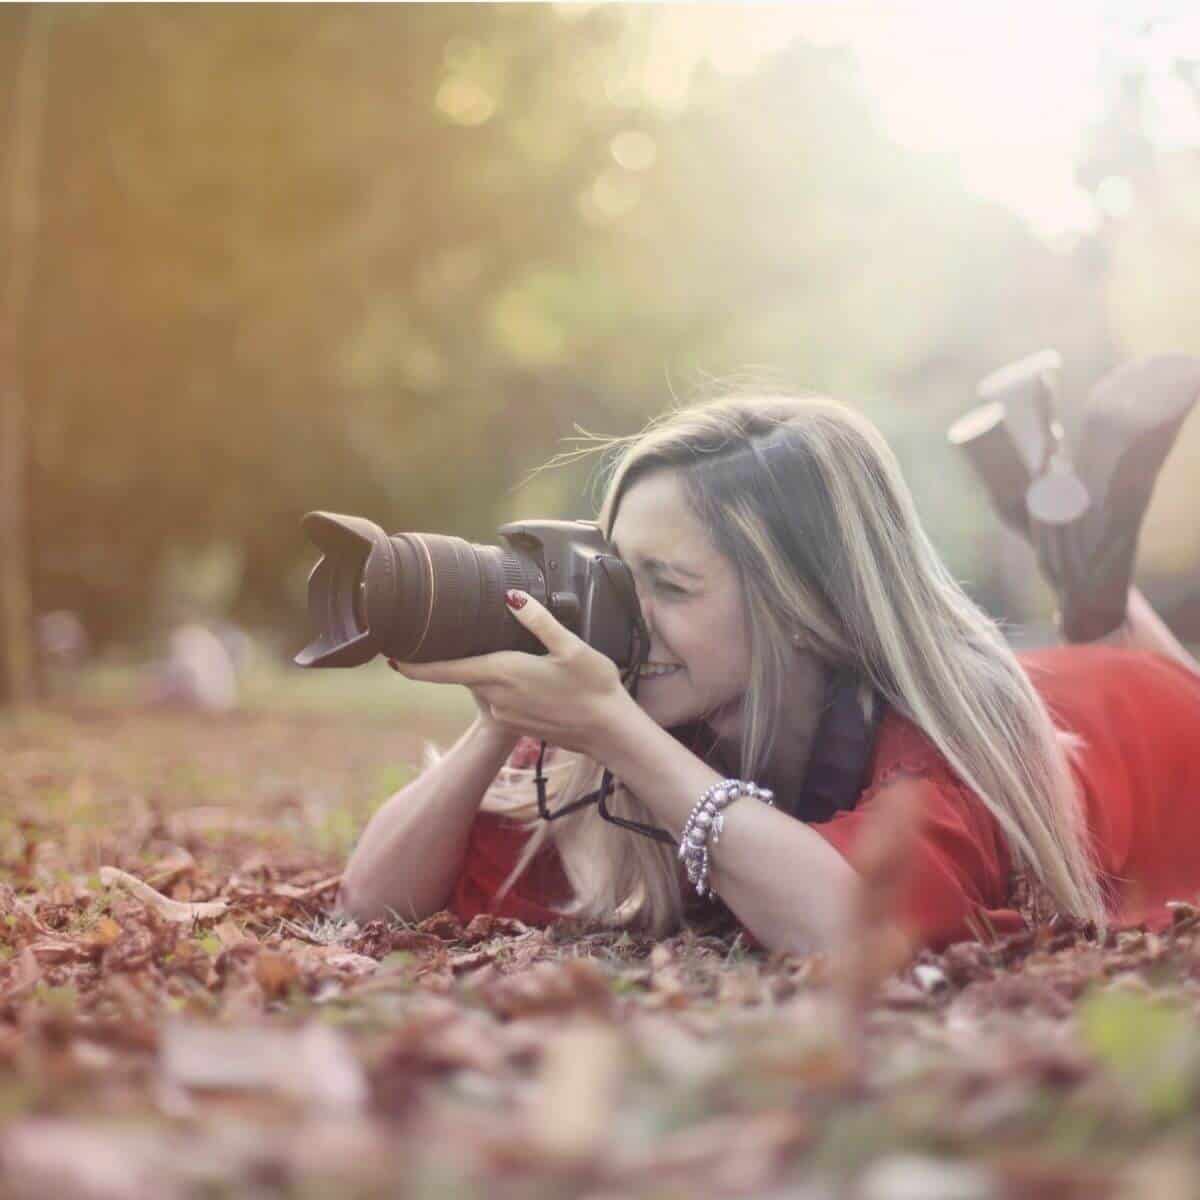 Photographer lying on the ground while taking a photo.